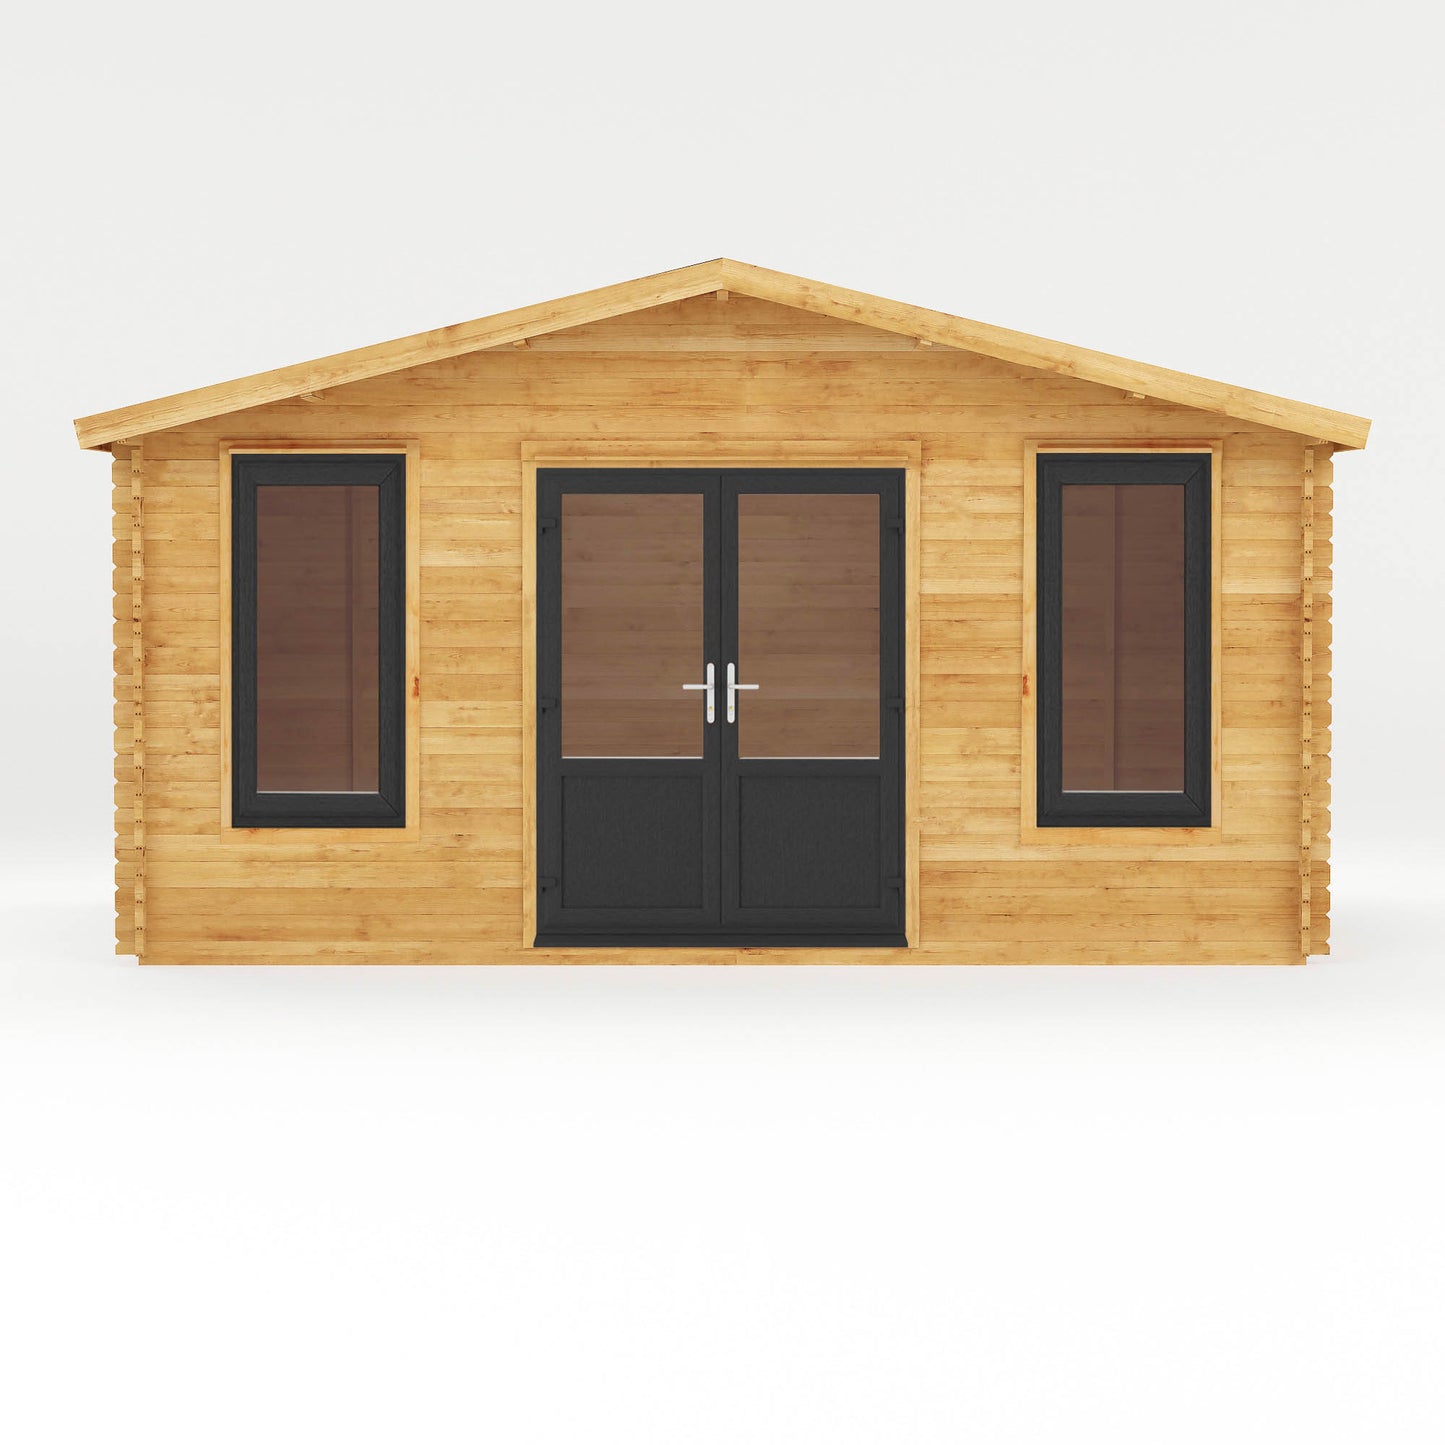 The 5m x 3m Sparrow Log Cabin with Anthracite UPVC